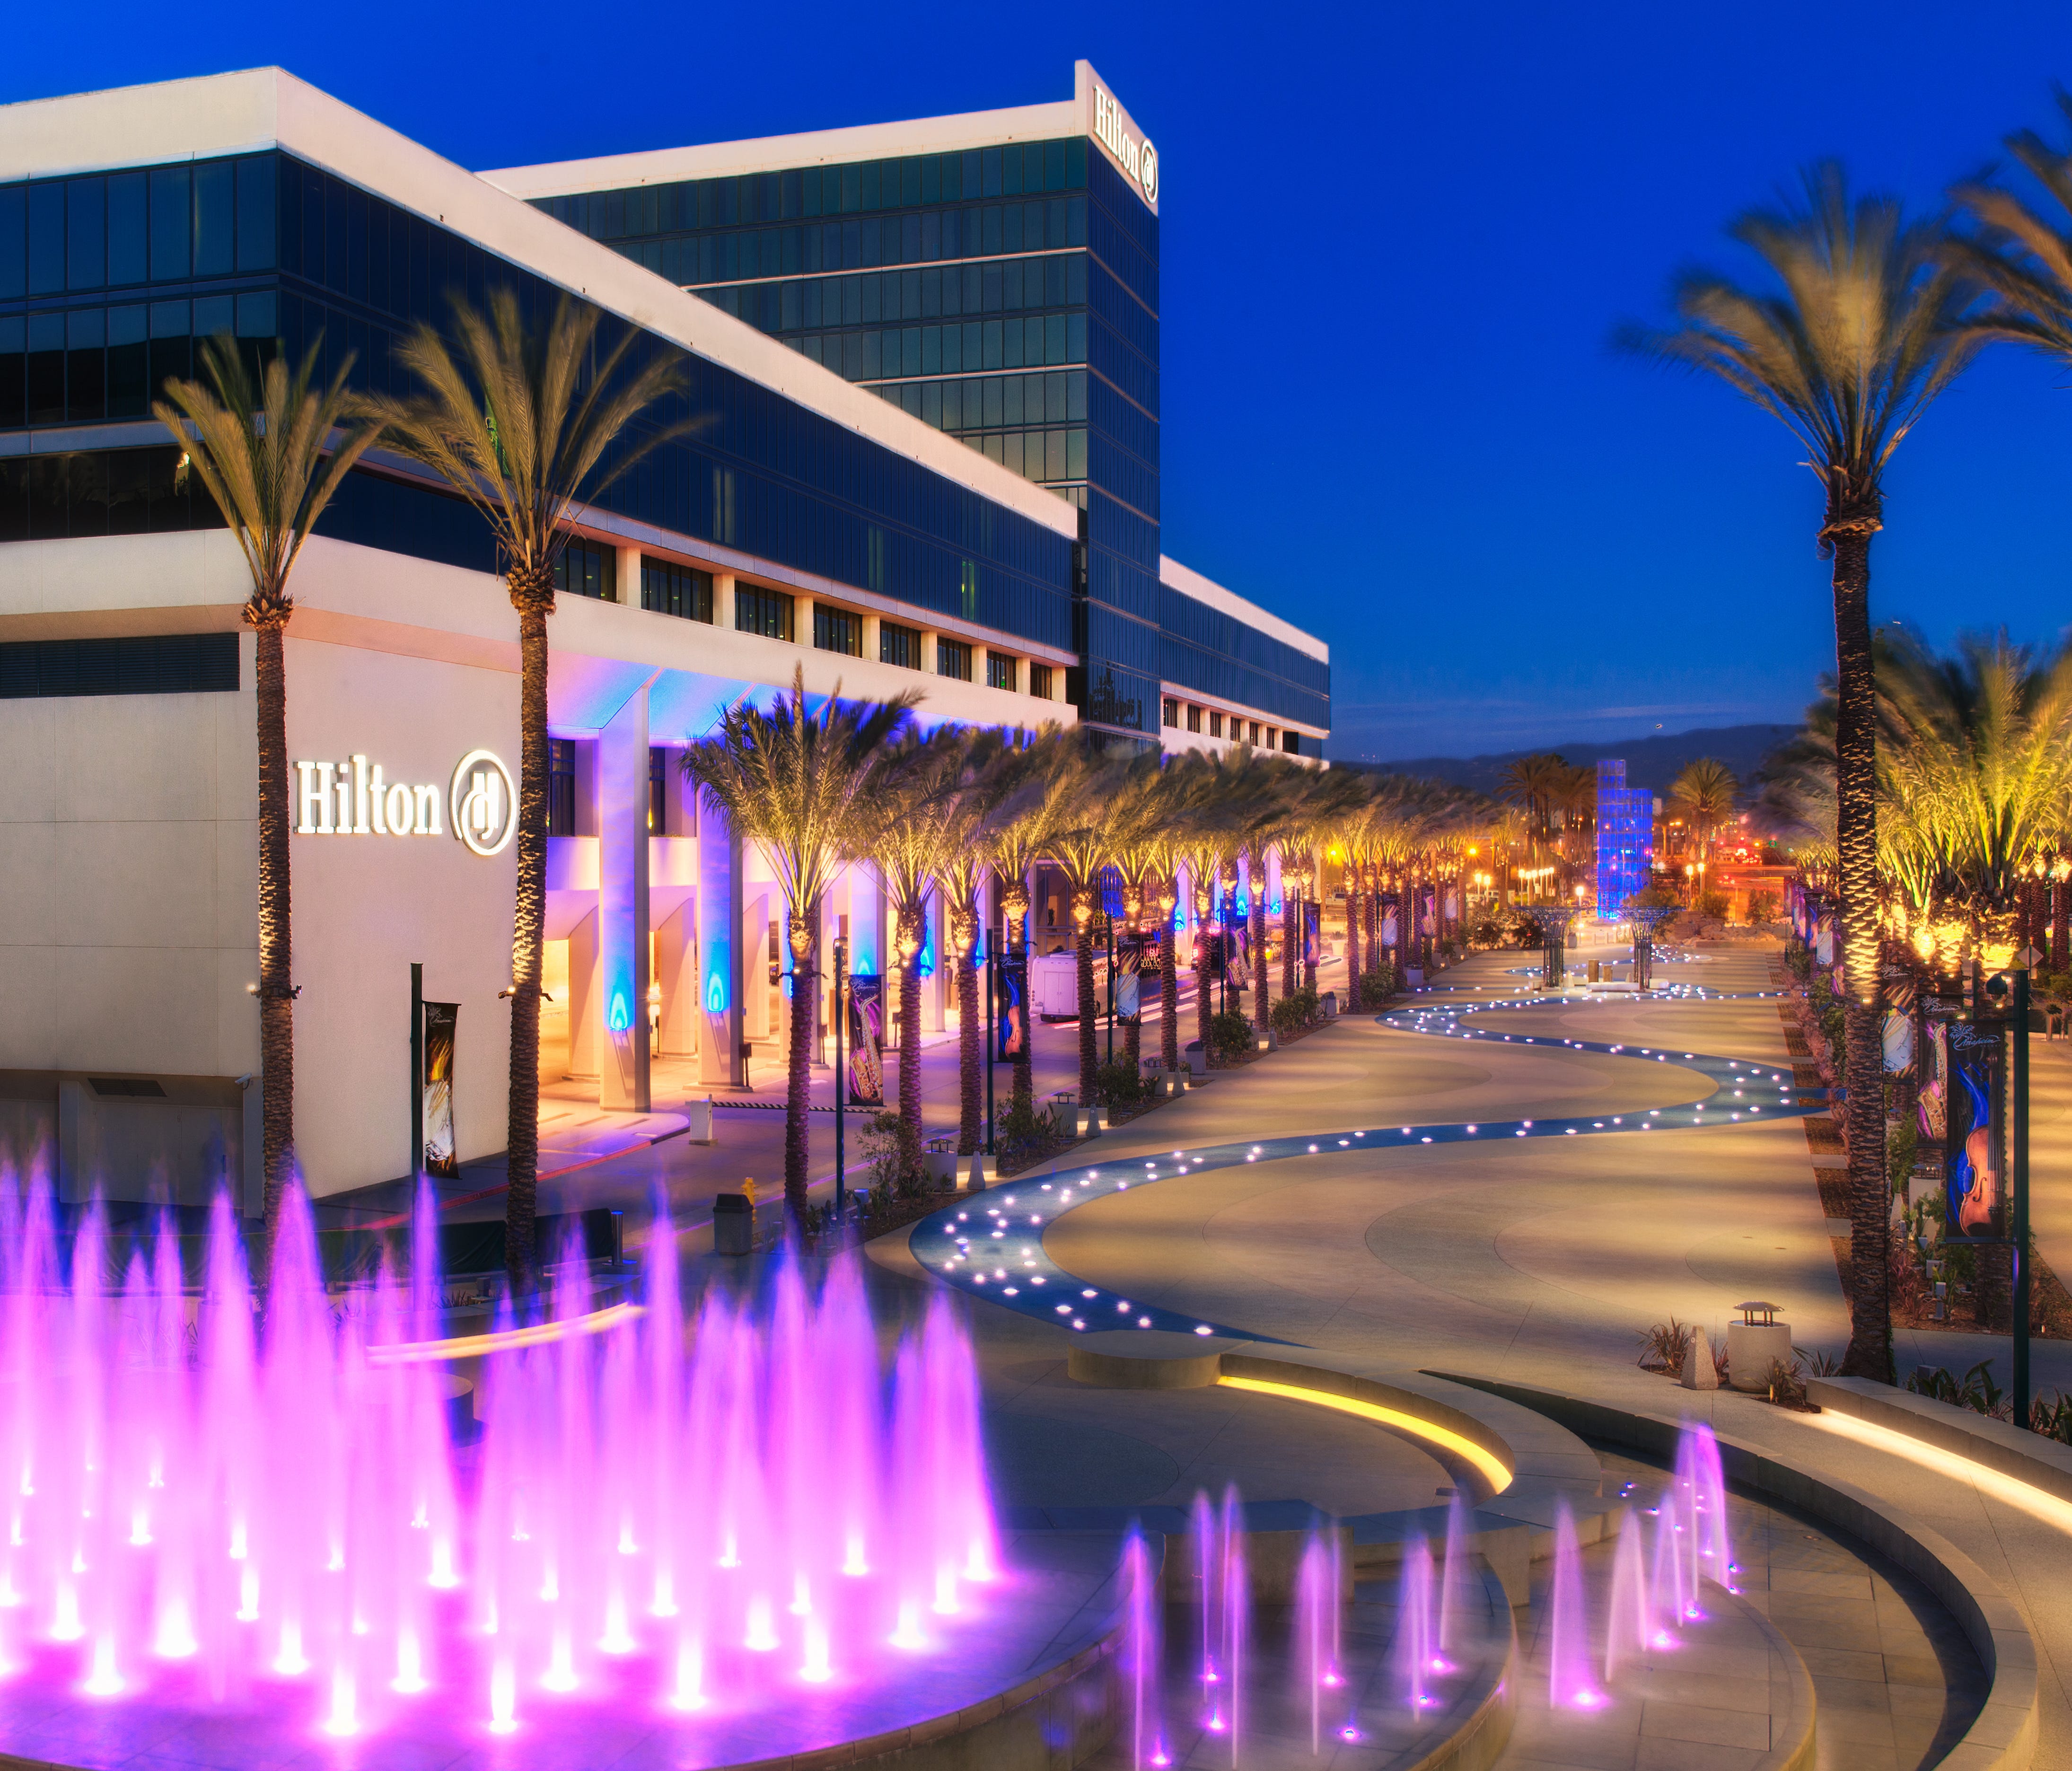 The Hilton Anaheim is one of the most in demand hotels in Orange County, Calif., according to Expedia.